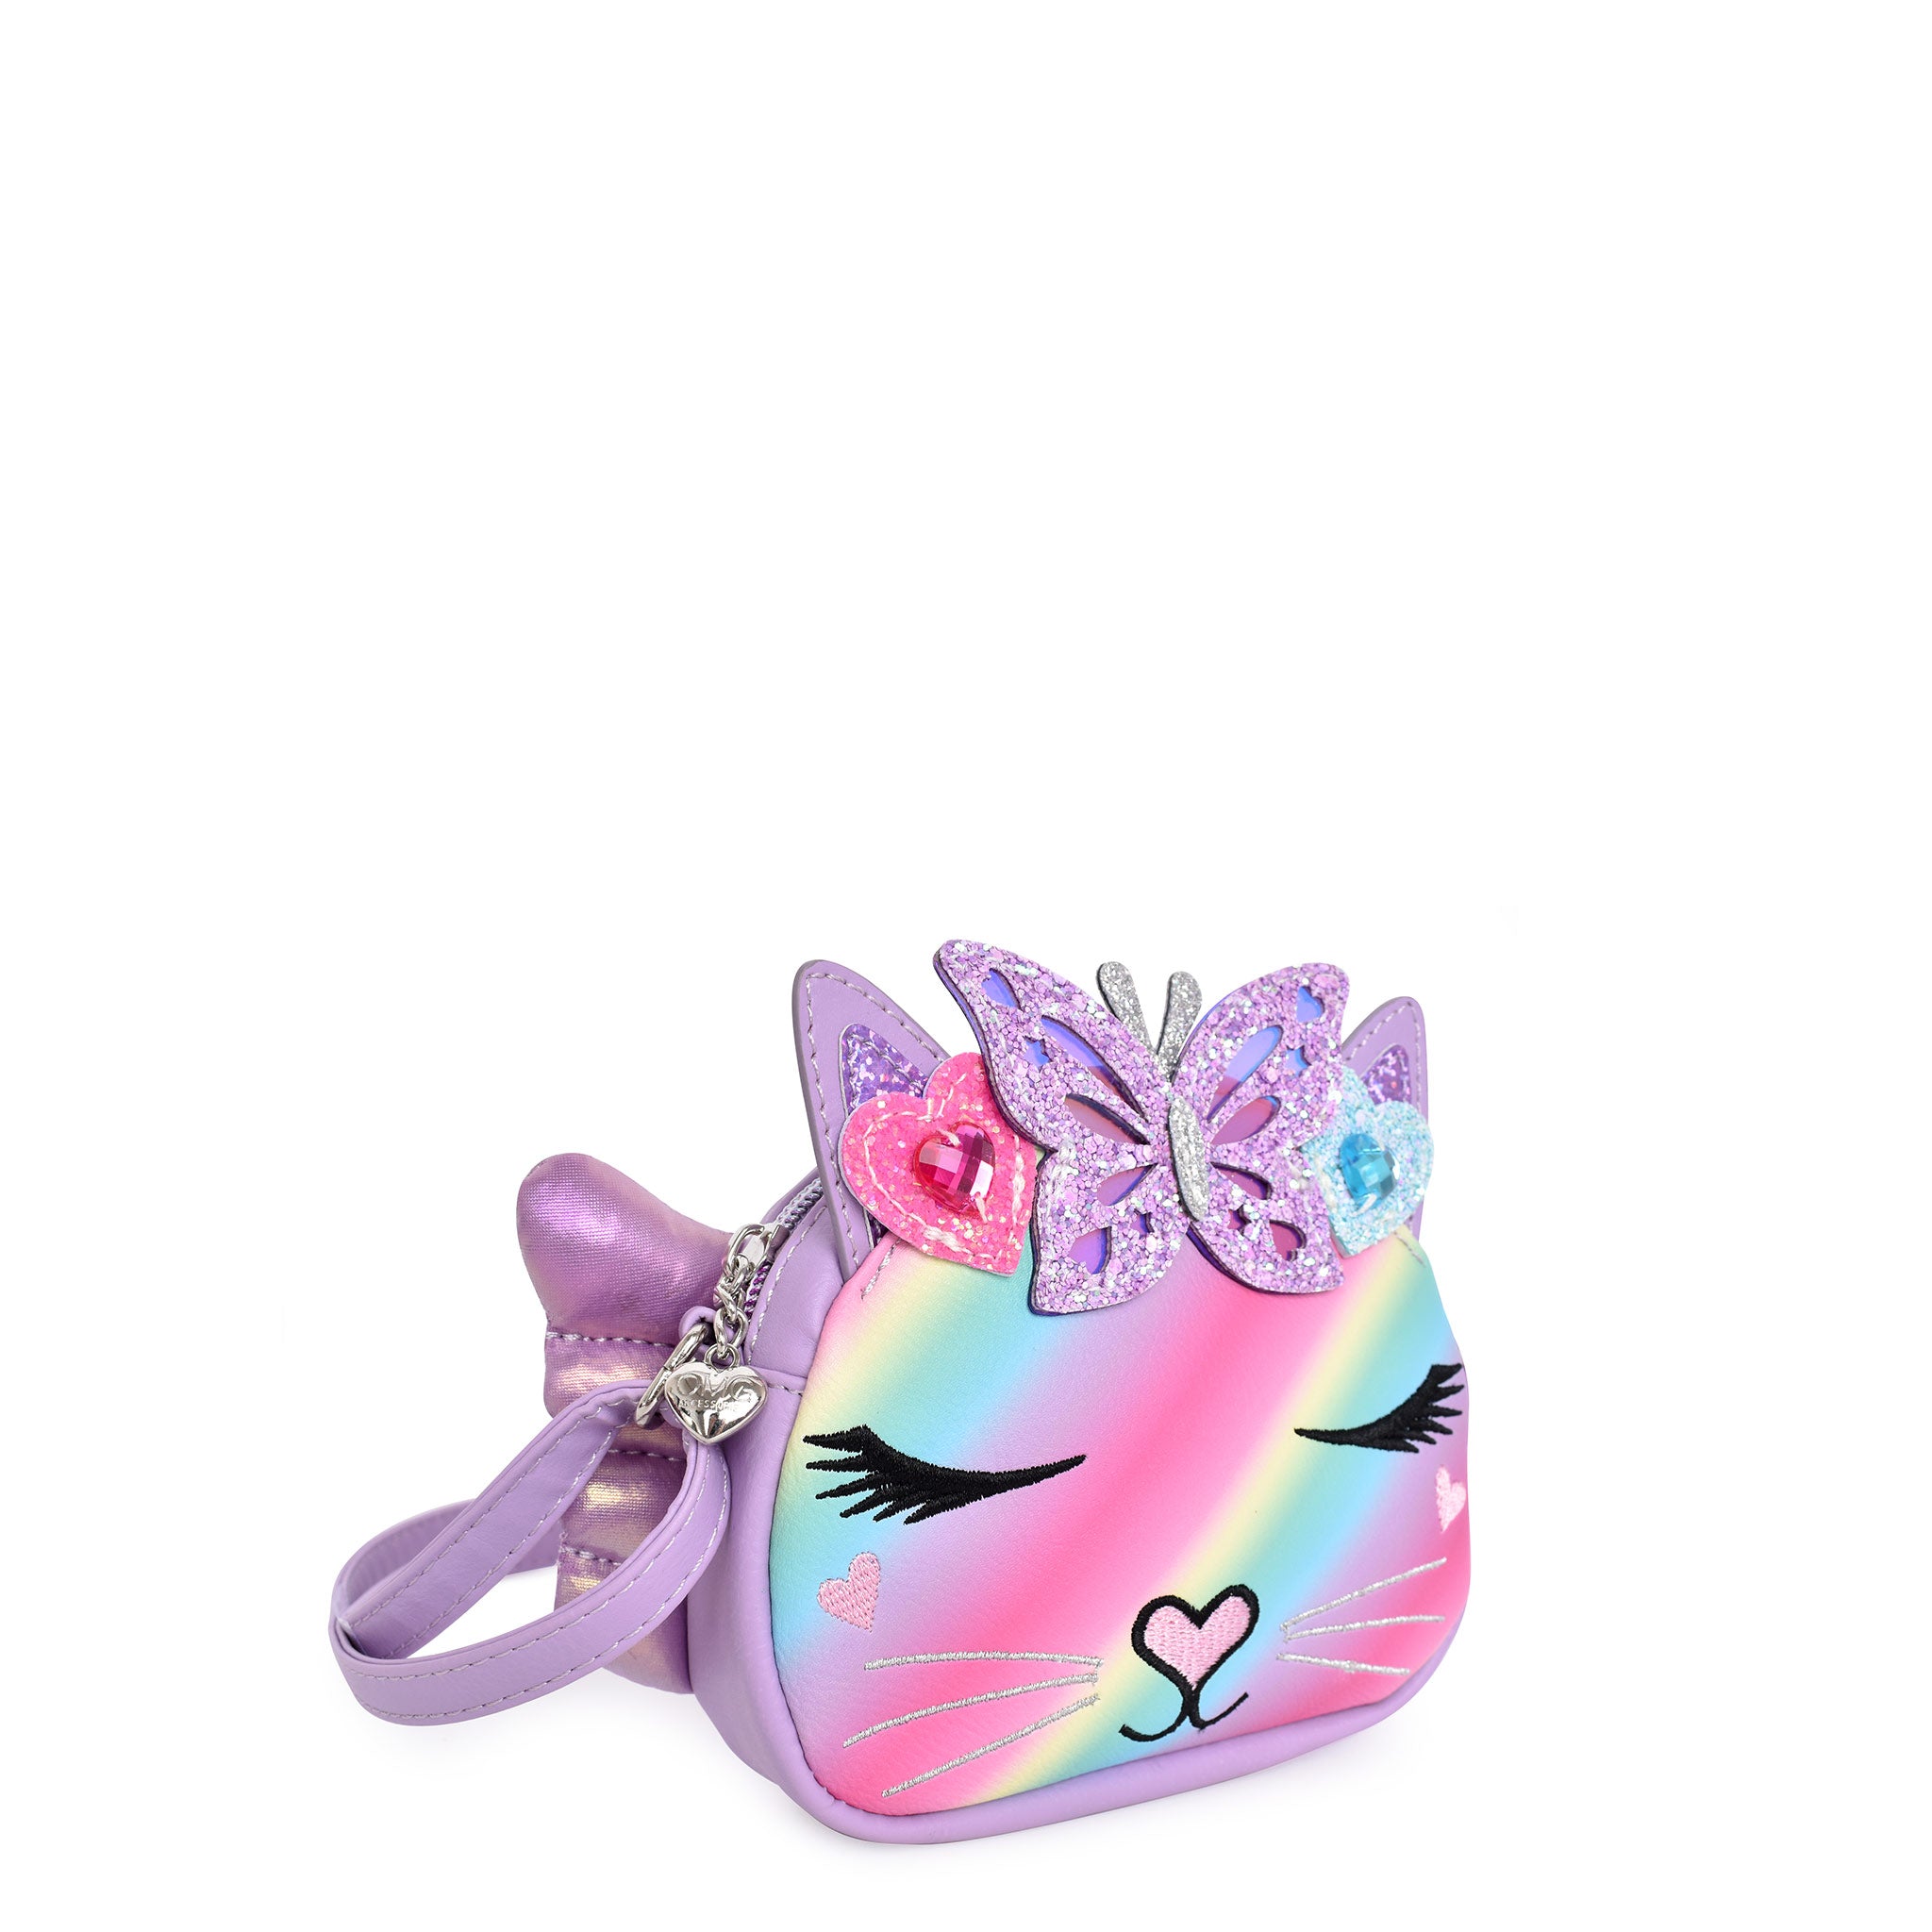 Side  view of an ombre rounded cat face crossbody with glitter butterfly and heart appliqués